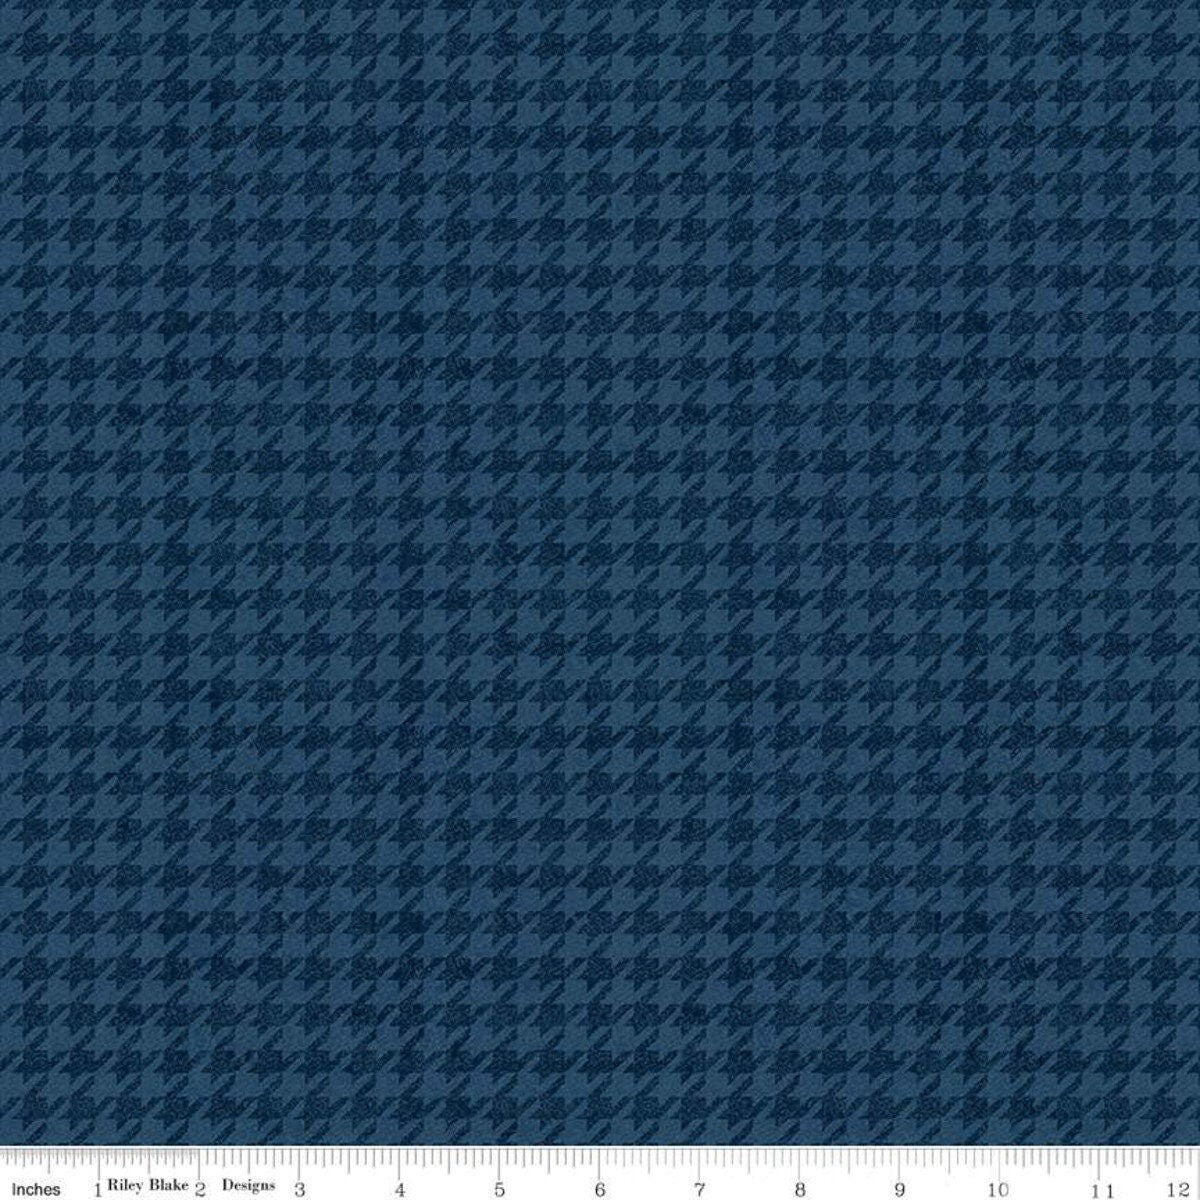 All About Plaids Houndstooth Blue - LAMINATED Cotton Fabric - Riley Blake